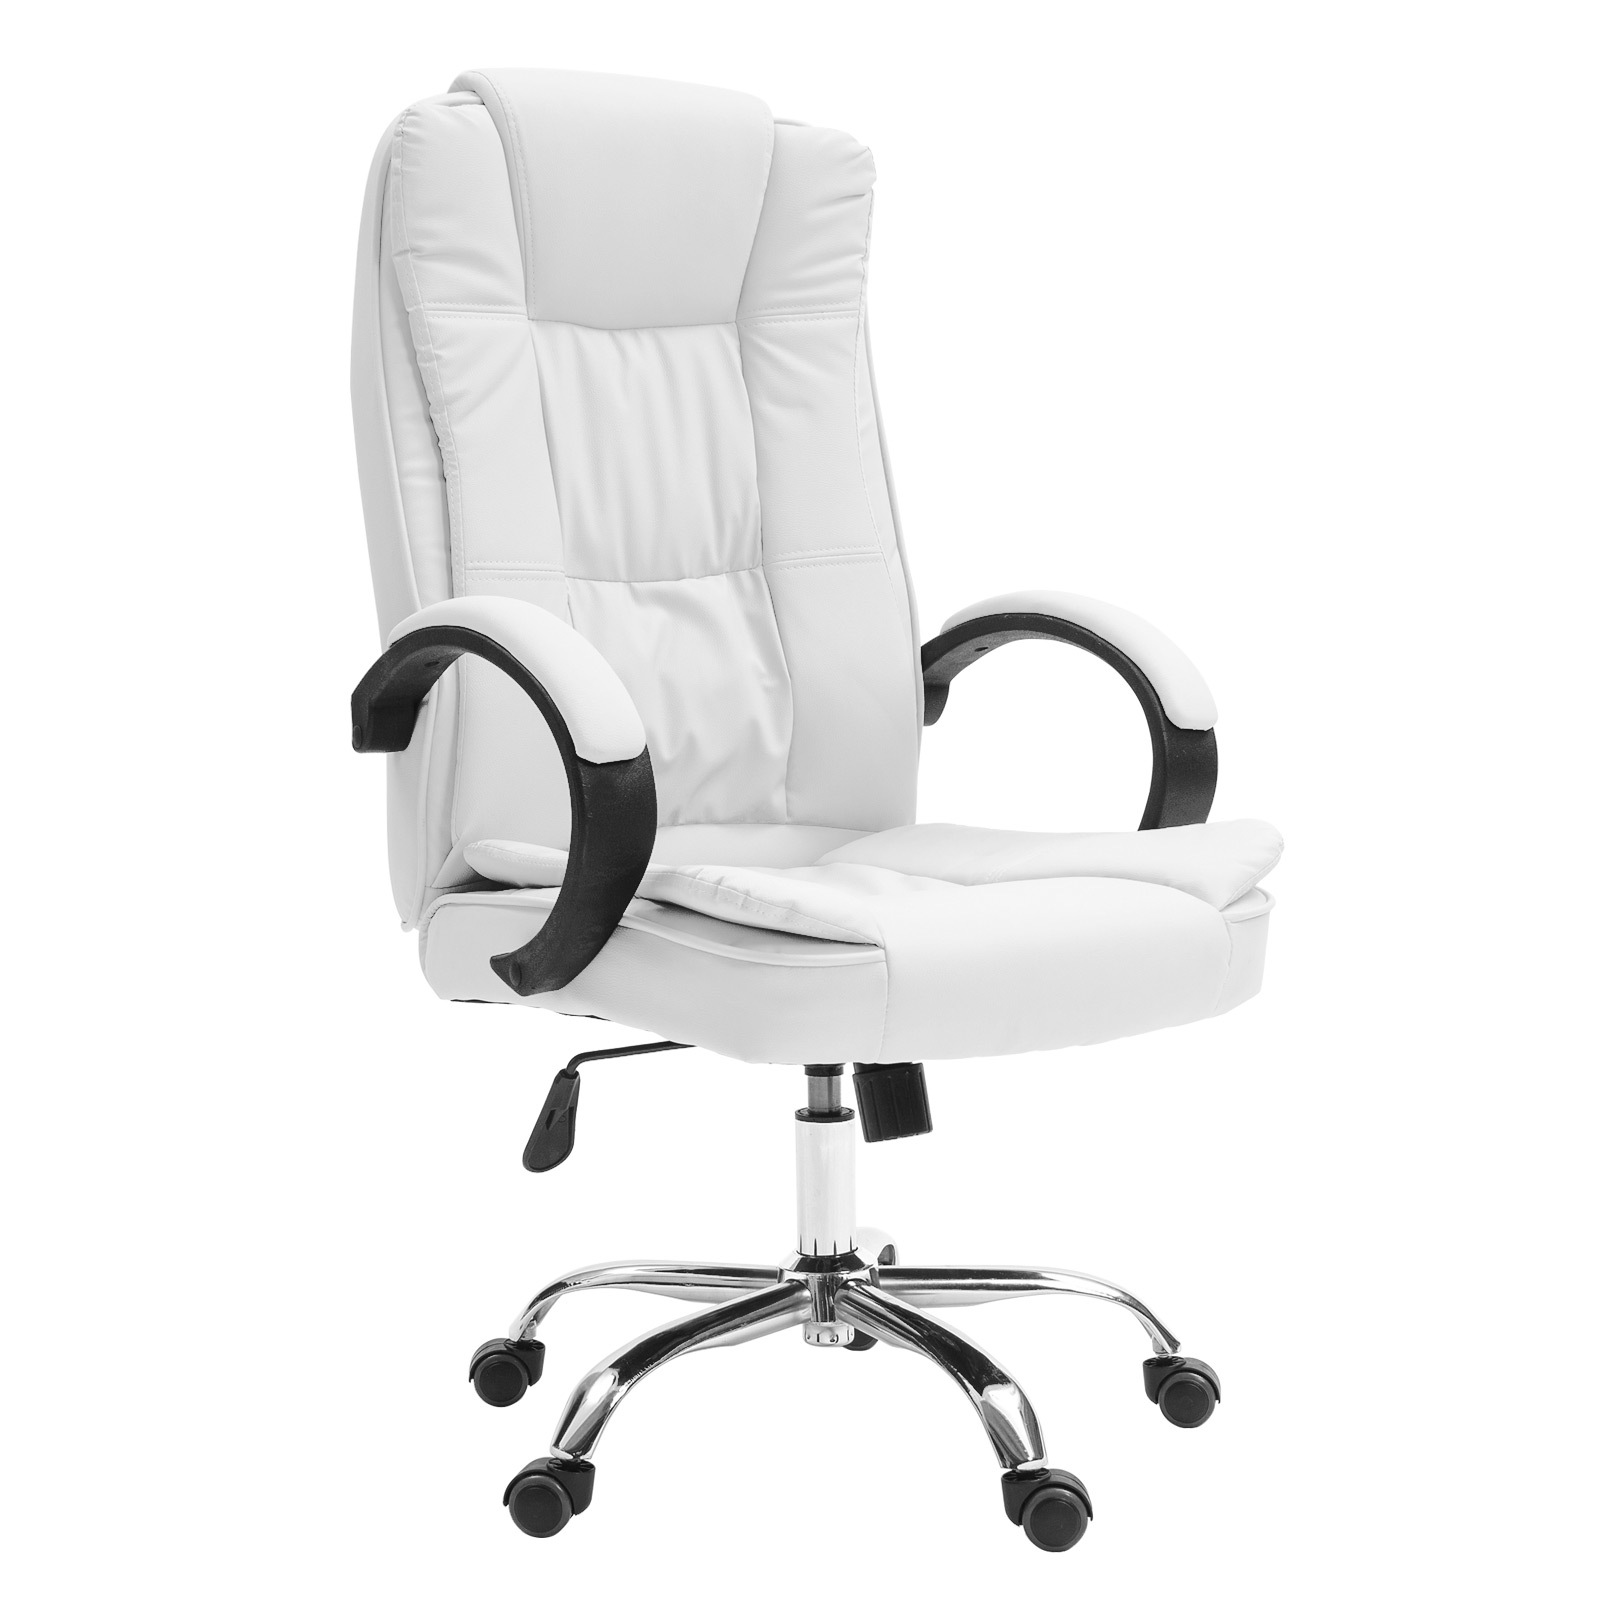 Executive Office Chair SAGE - WHITE